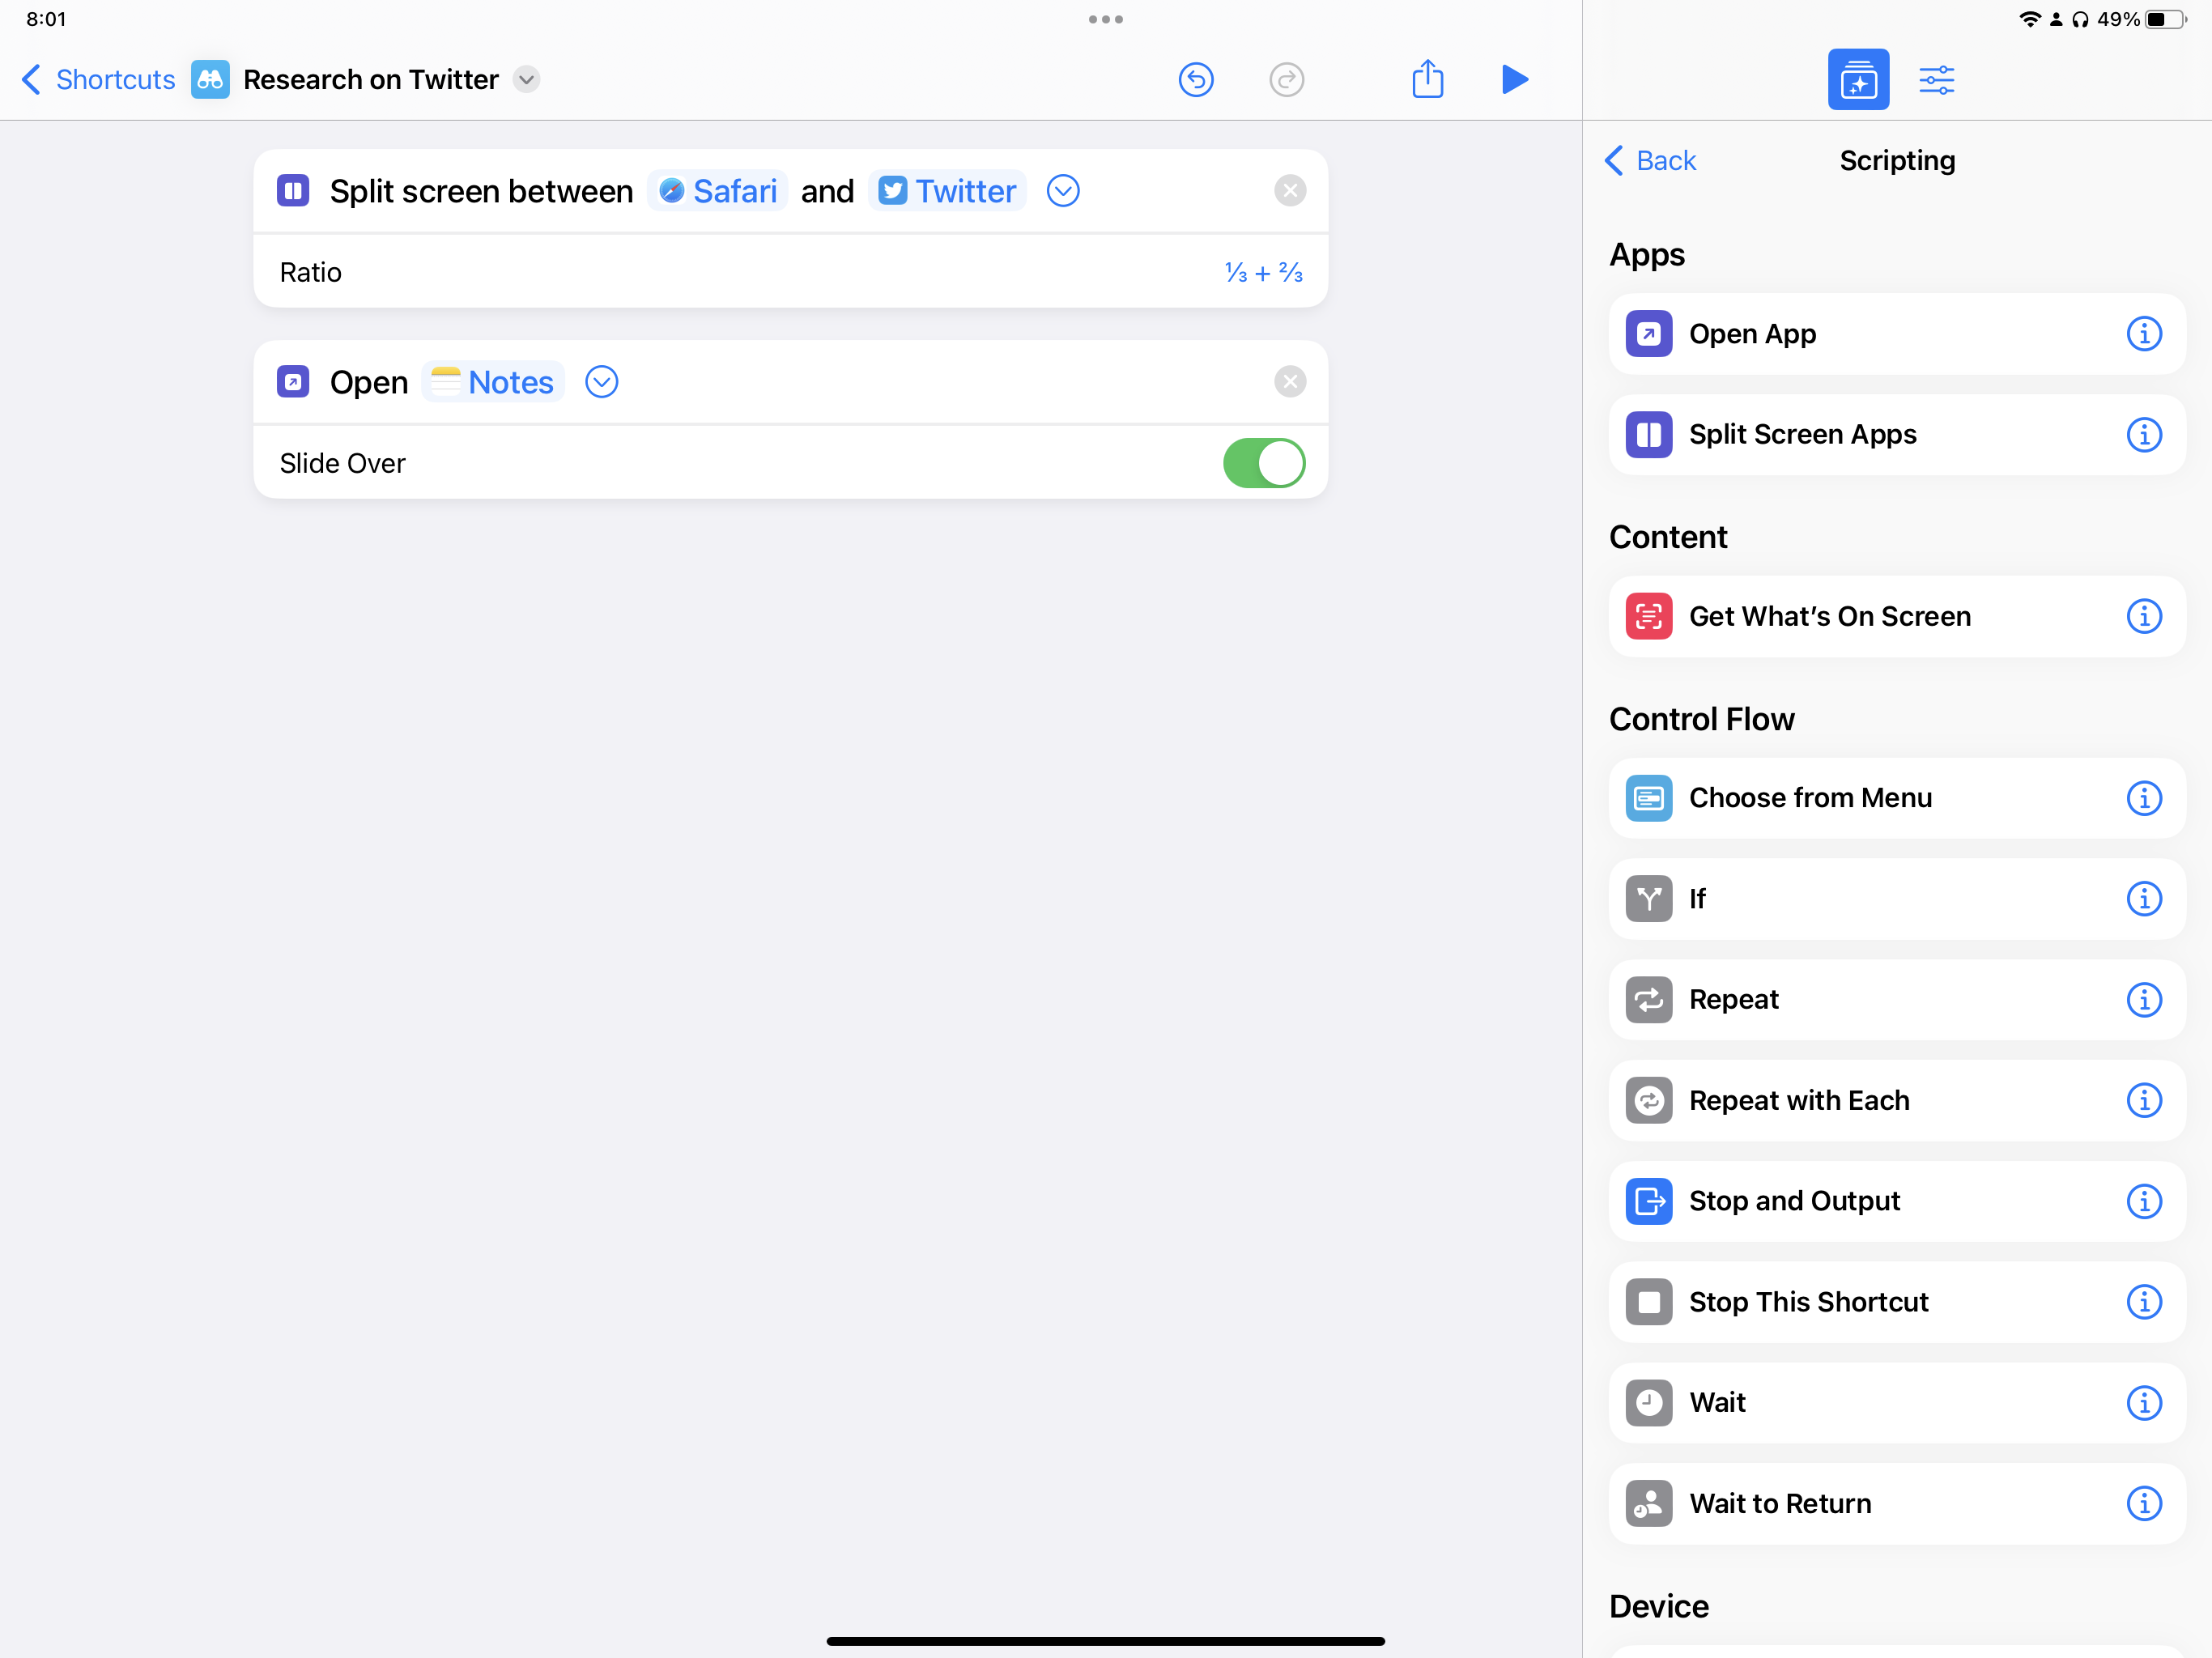 Screenshot of split screen apps action and open app action in shortcut set to slide over.